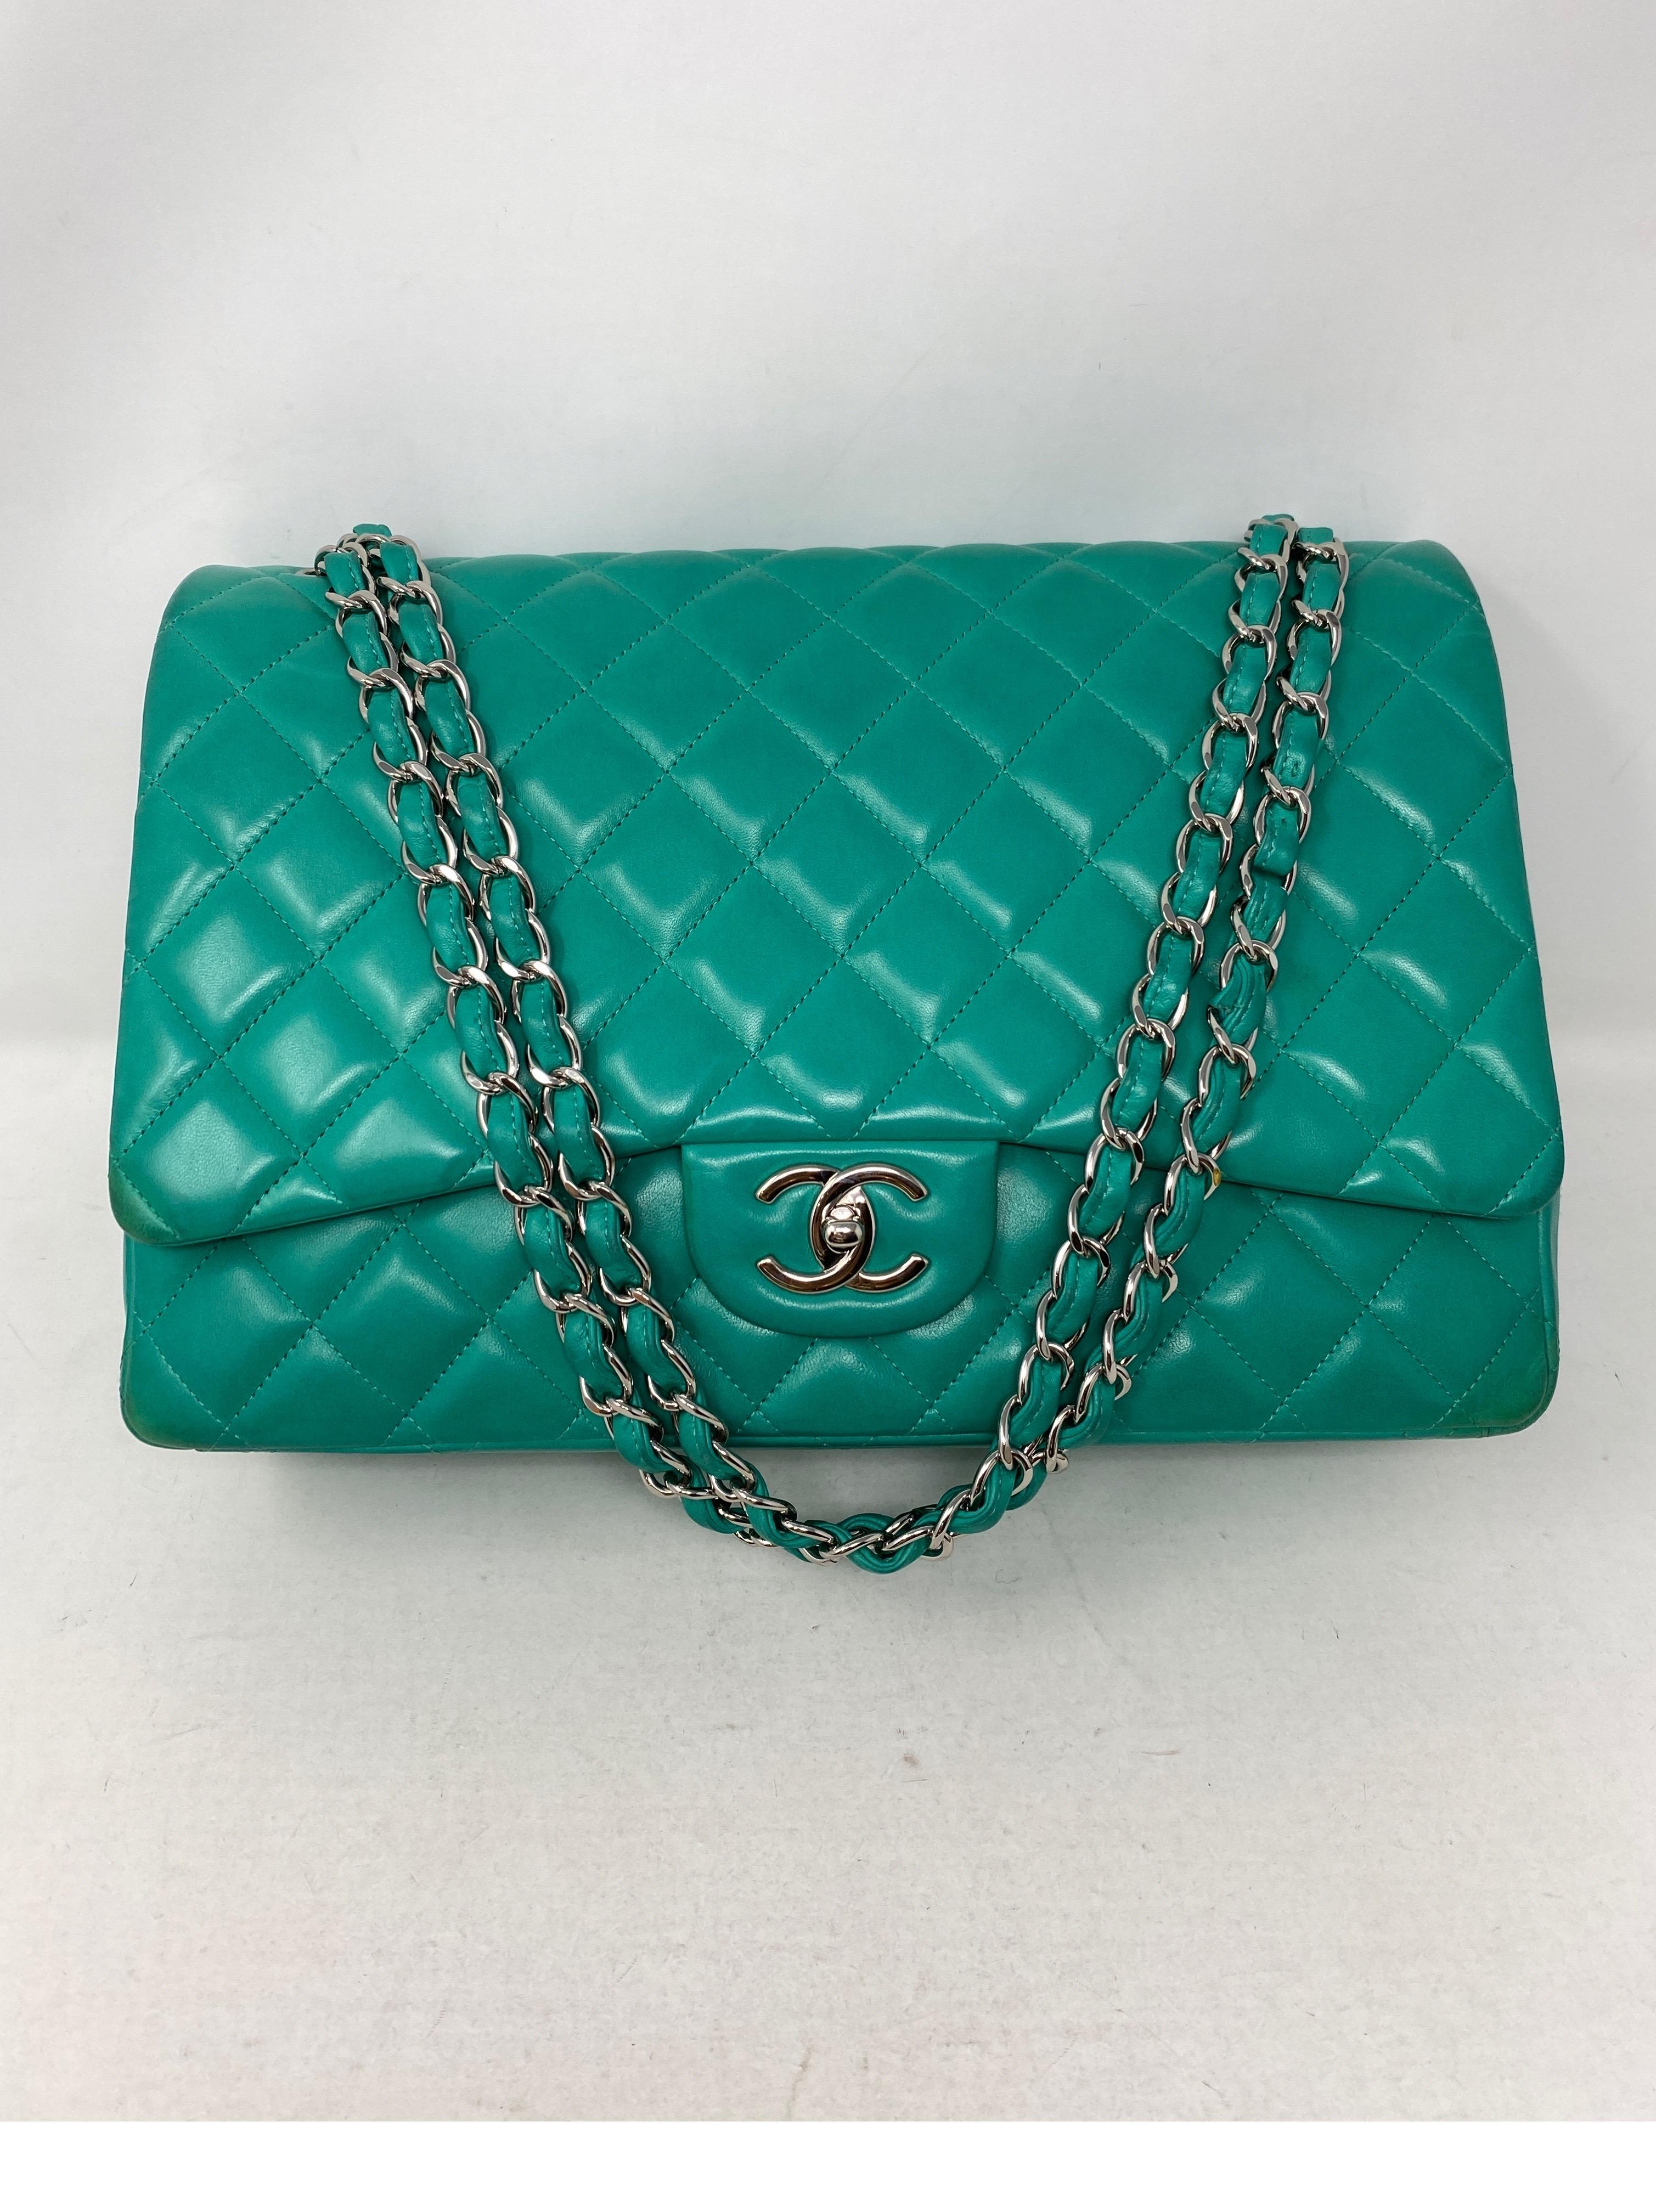 Chanel Teal Maxi Double Flap Bag. Silver hardware. Gorgeous rare teal color. Has light wear discoloration on corners. Not very noticeable. Please check photos. Hard to find in this color. Don't miss out. Serial number inside bag. Guaranteed